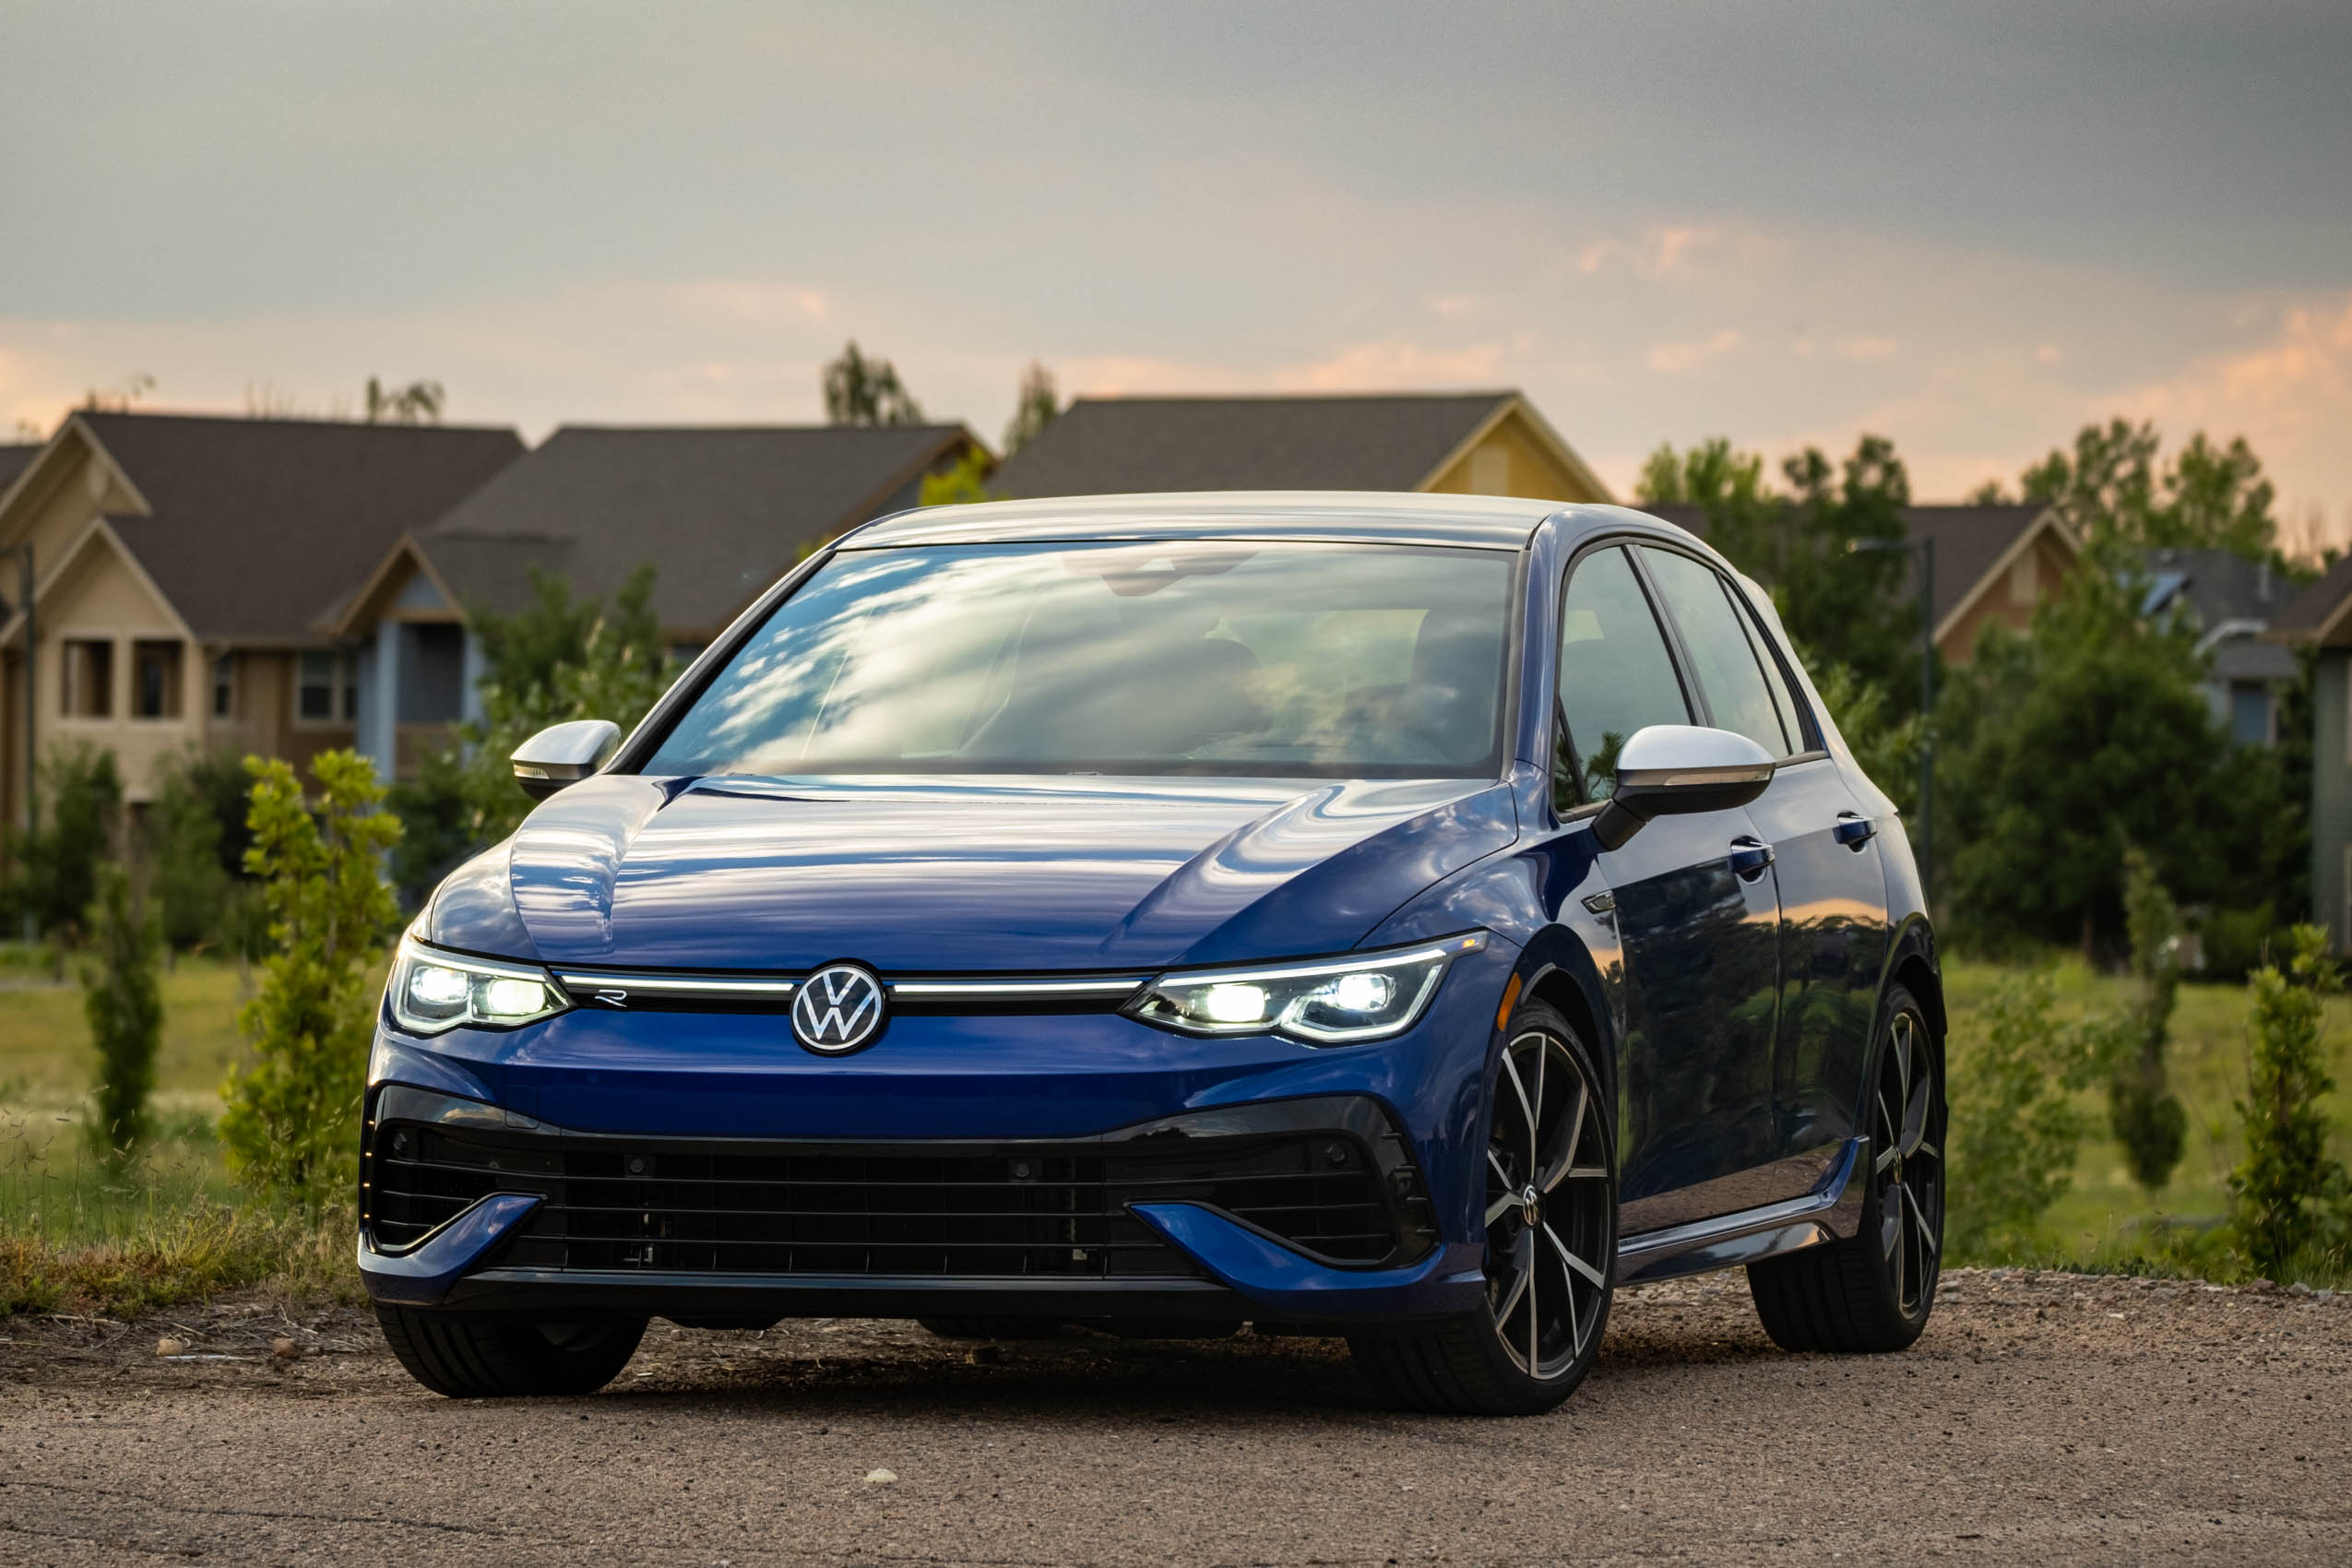 Bully niveau schoolbord 2022 VW Golf R Review: Confronting the Lies of My Youth | The Drive